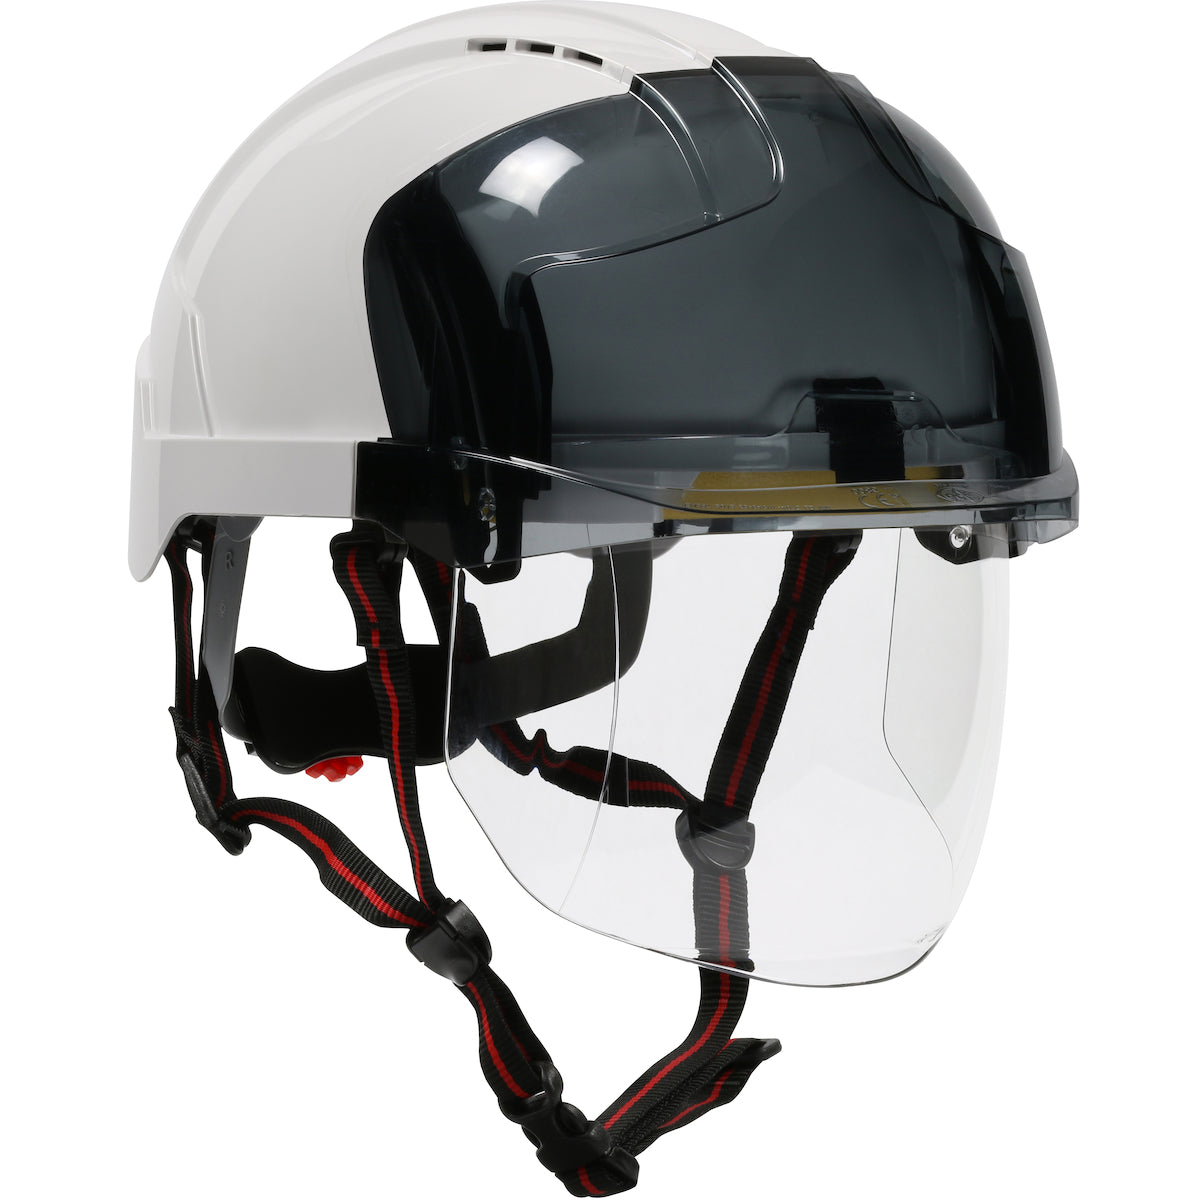 EVO® VISTA™ ASCEND™ Type I, Vented Industrial Safety Helmet with fully adjustable four point chinstrap, Lightweight ABS Shell, Integrated Faceshield, 6-Point Polyester Suspension and Wheel Ratchet Adjustment